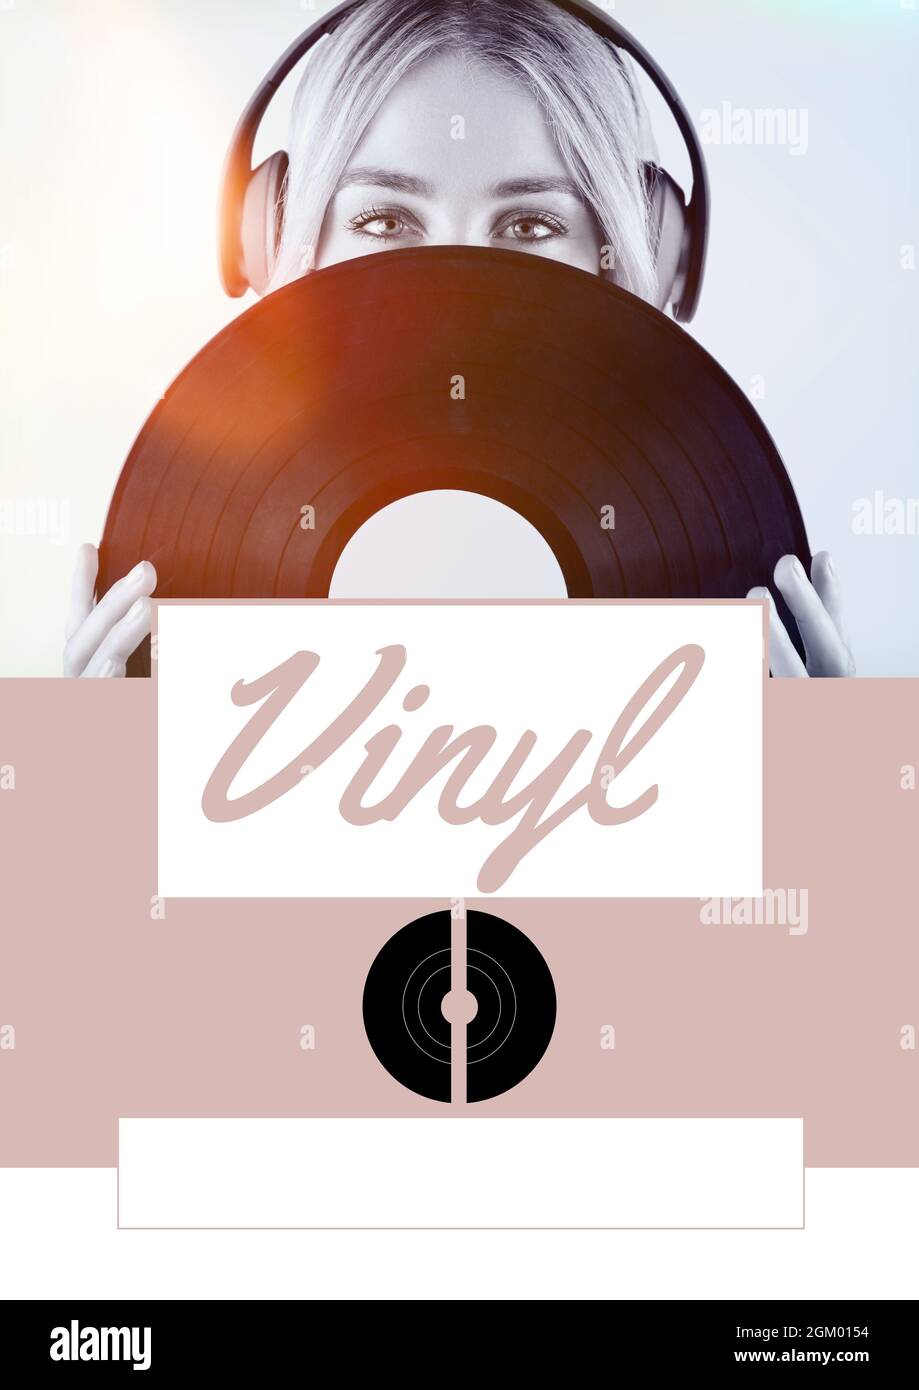 Vinyl text against female musician wearing headphones holding a vinyl record against grey background Stock Photo